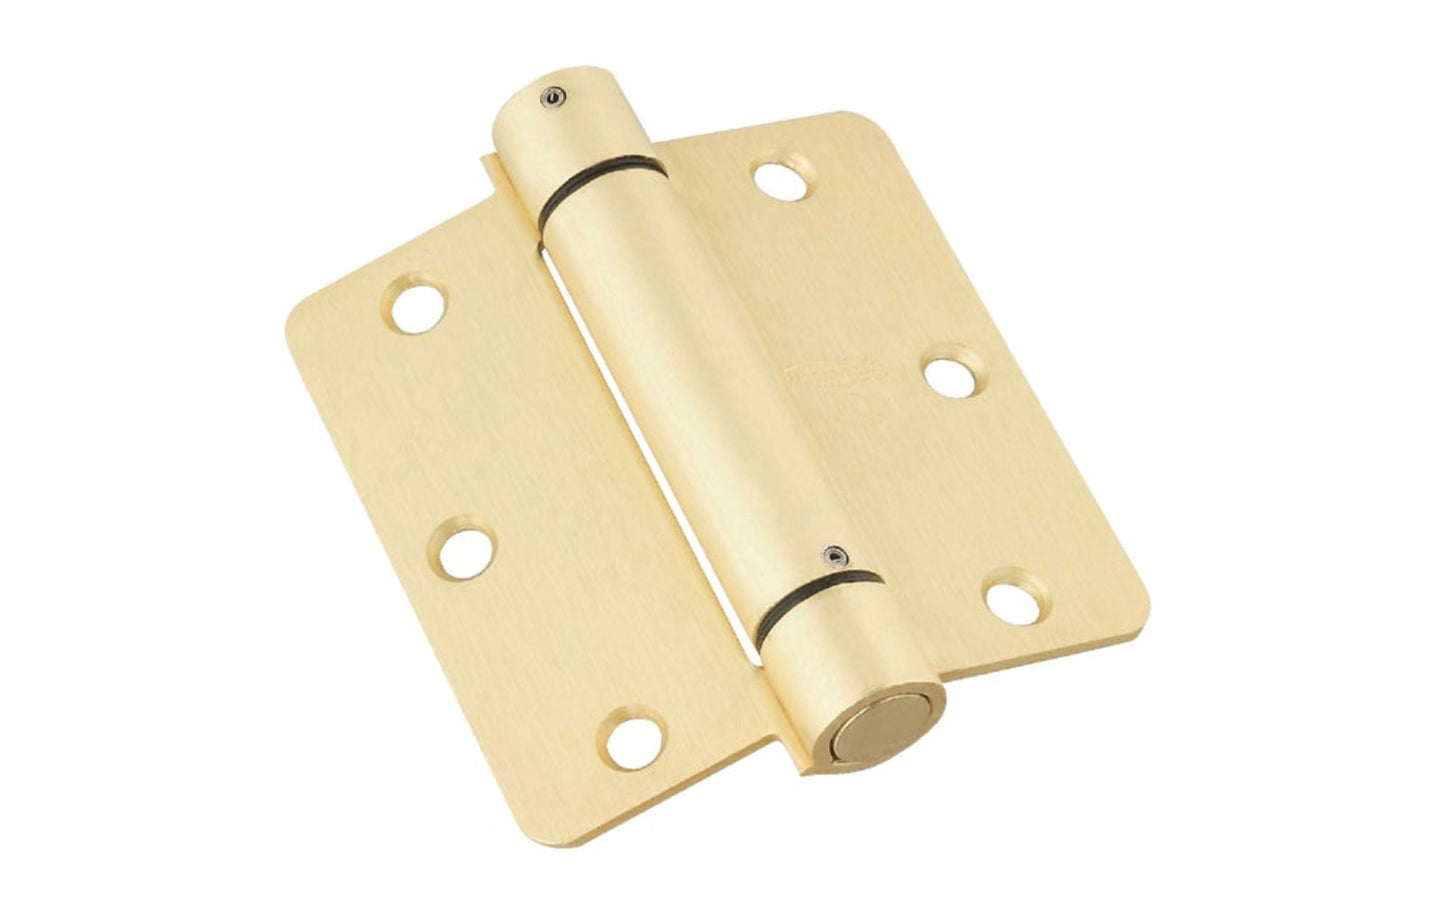 This 3-1/2" Brass Finish Spring Hinge is designed for hanging self-closing doors in basements, stairways, garages, & entrances, etc. Can be used in residential, commercial, & apartment buildings. Hinge is UL approved for fire doors. Closing speed is adjustable. Fits standard hinge cutout. 1/4" radius, round corner automatic door-closing spring hinge. Satin Nickel Finish on cold-rolled steel material. Sold as a single hinge in pack.  National Hardware Model No. N185-199.